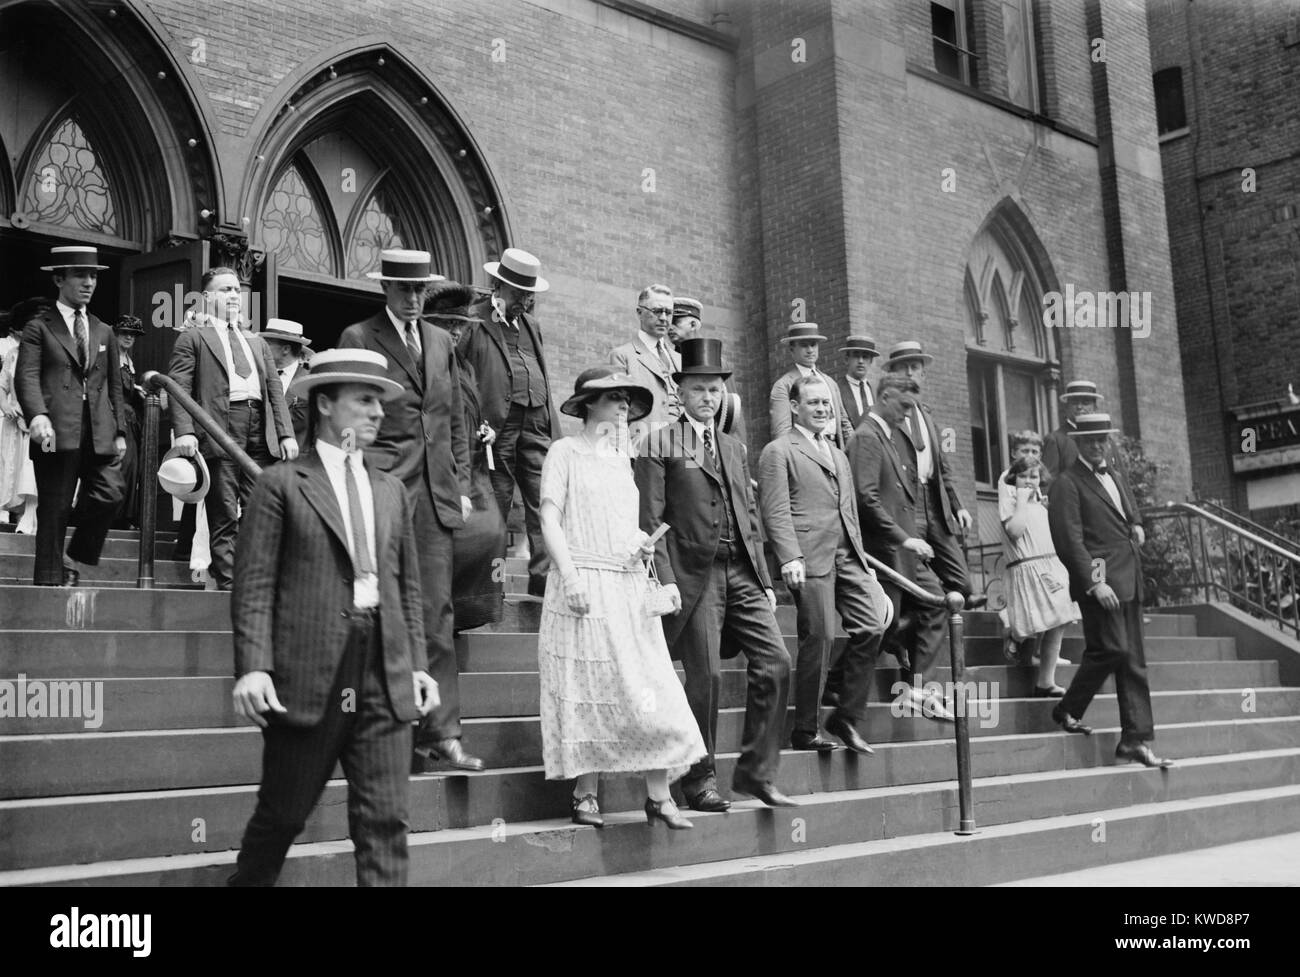 President Calvin Coolidge and First Lady Grace Coolidge leaving church on Aug. 5, 1923. It was the first Sunday after the death of President Warren Harding three days earlier. (BSLOC 2015 16 17) Stock Photo